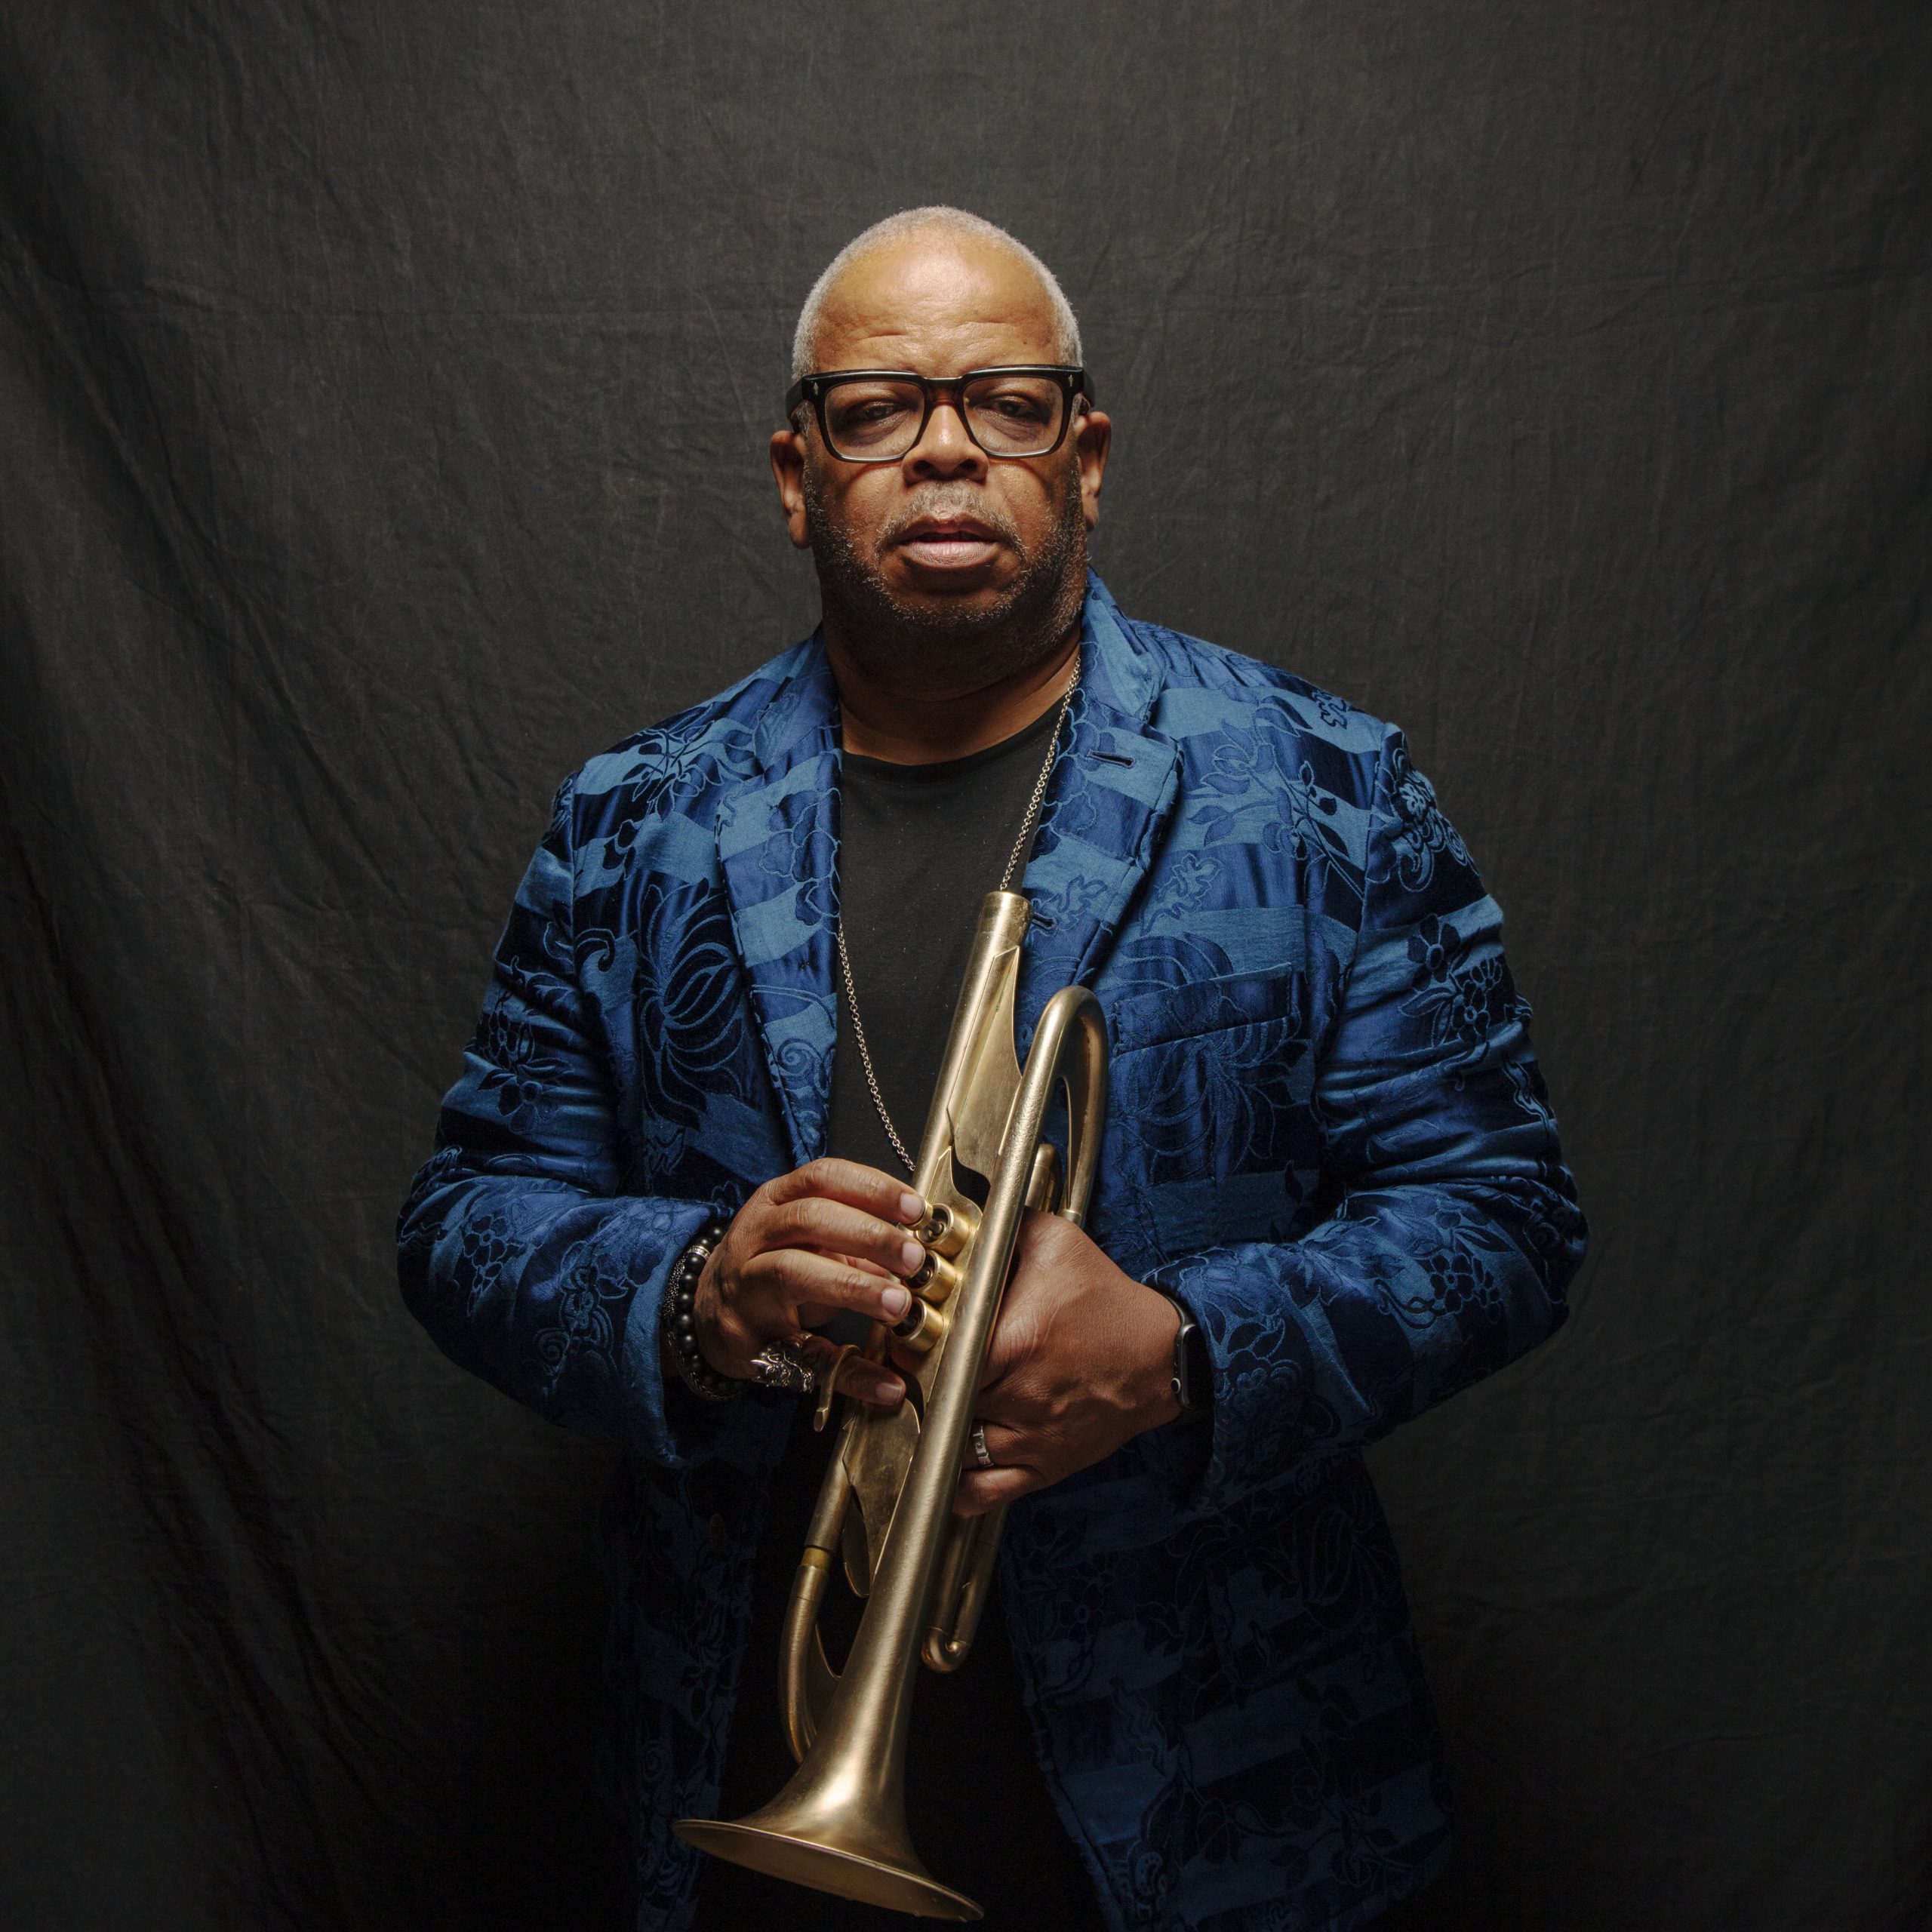 Grammy Winning Trumpeter Terence Blanchard Gives Back at Harlem School of the Arts